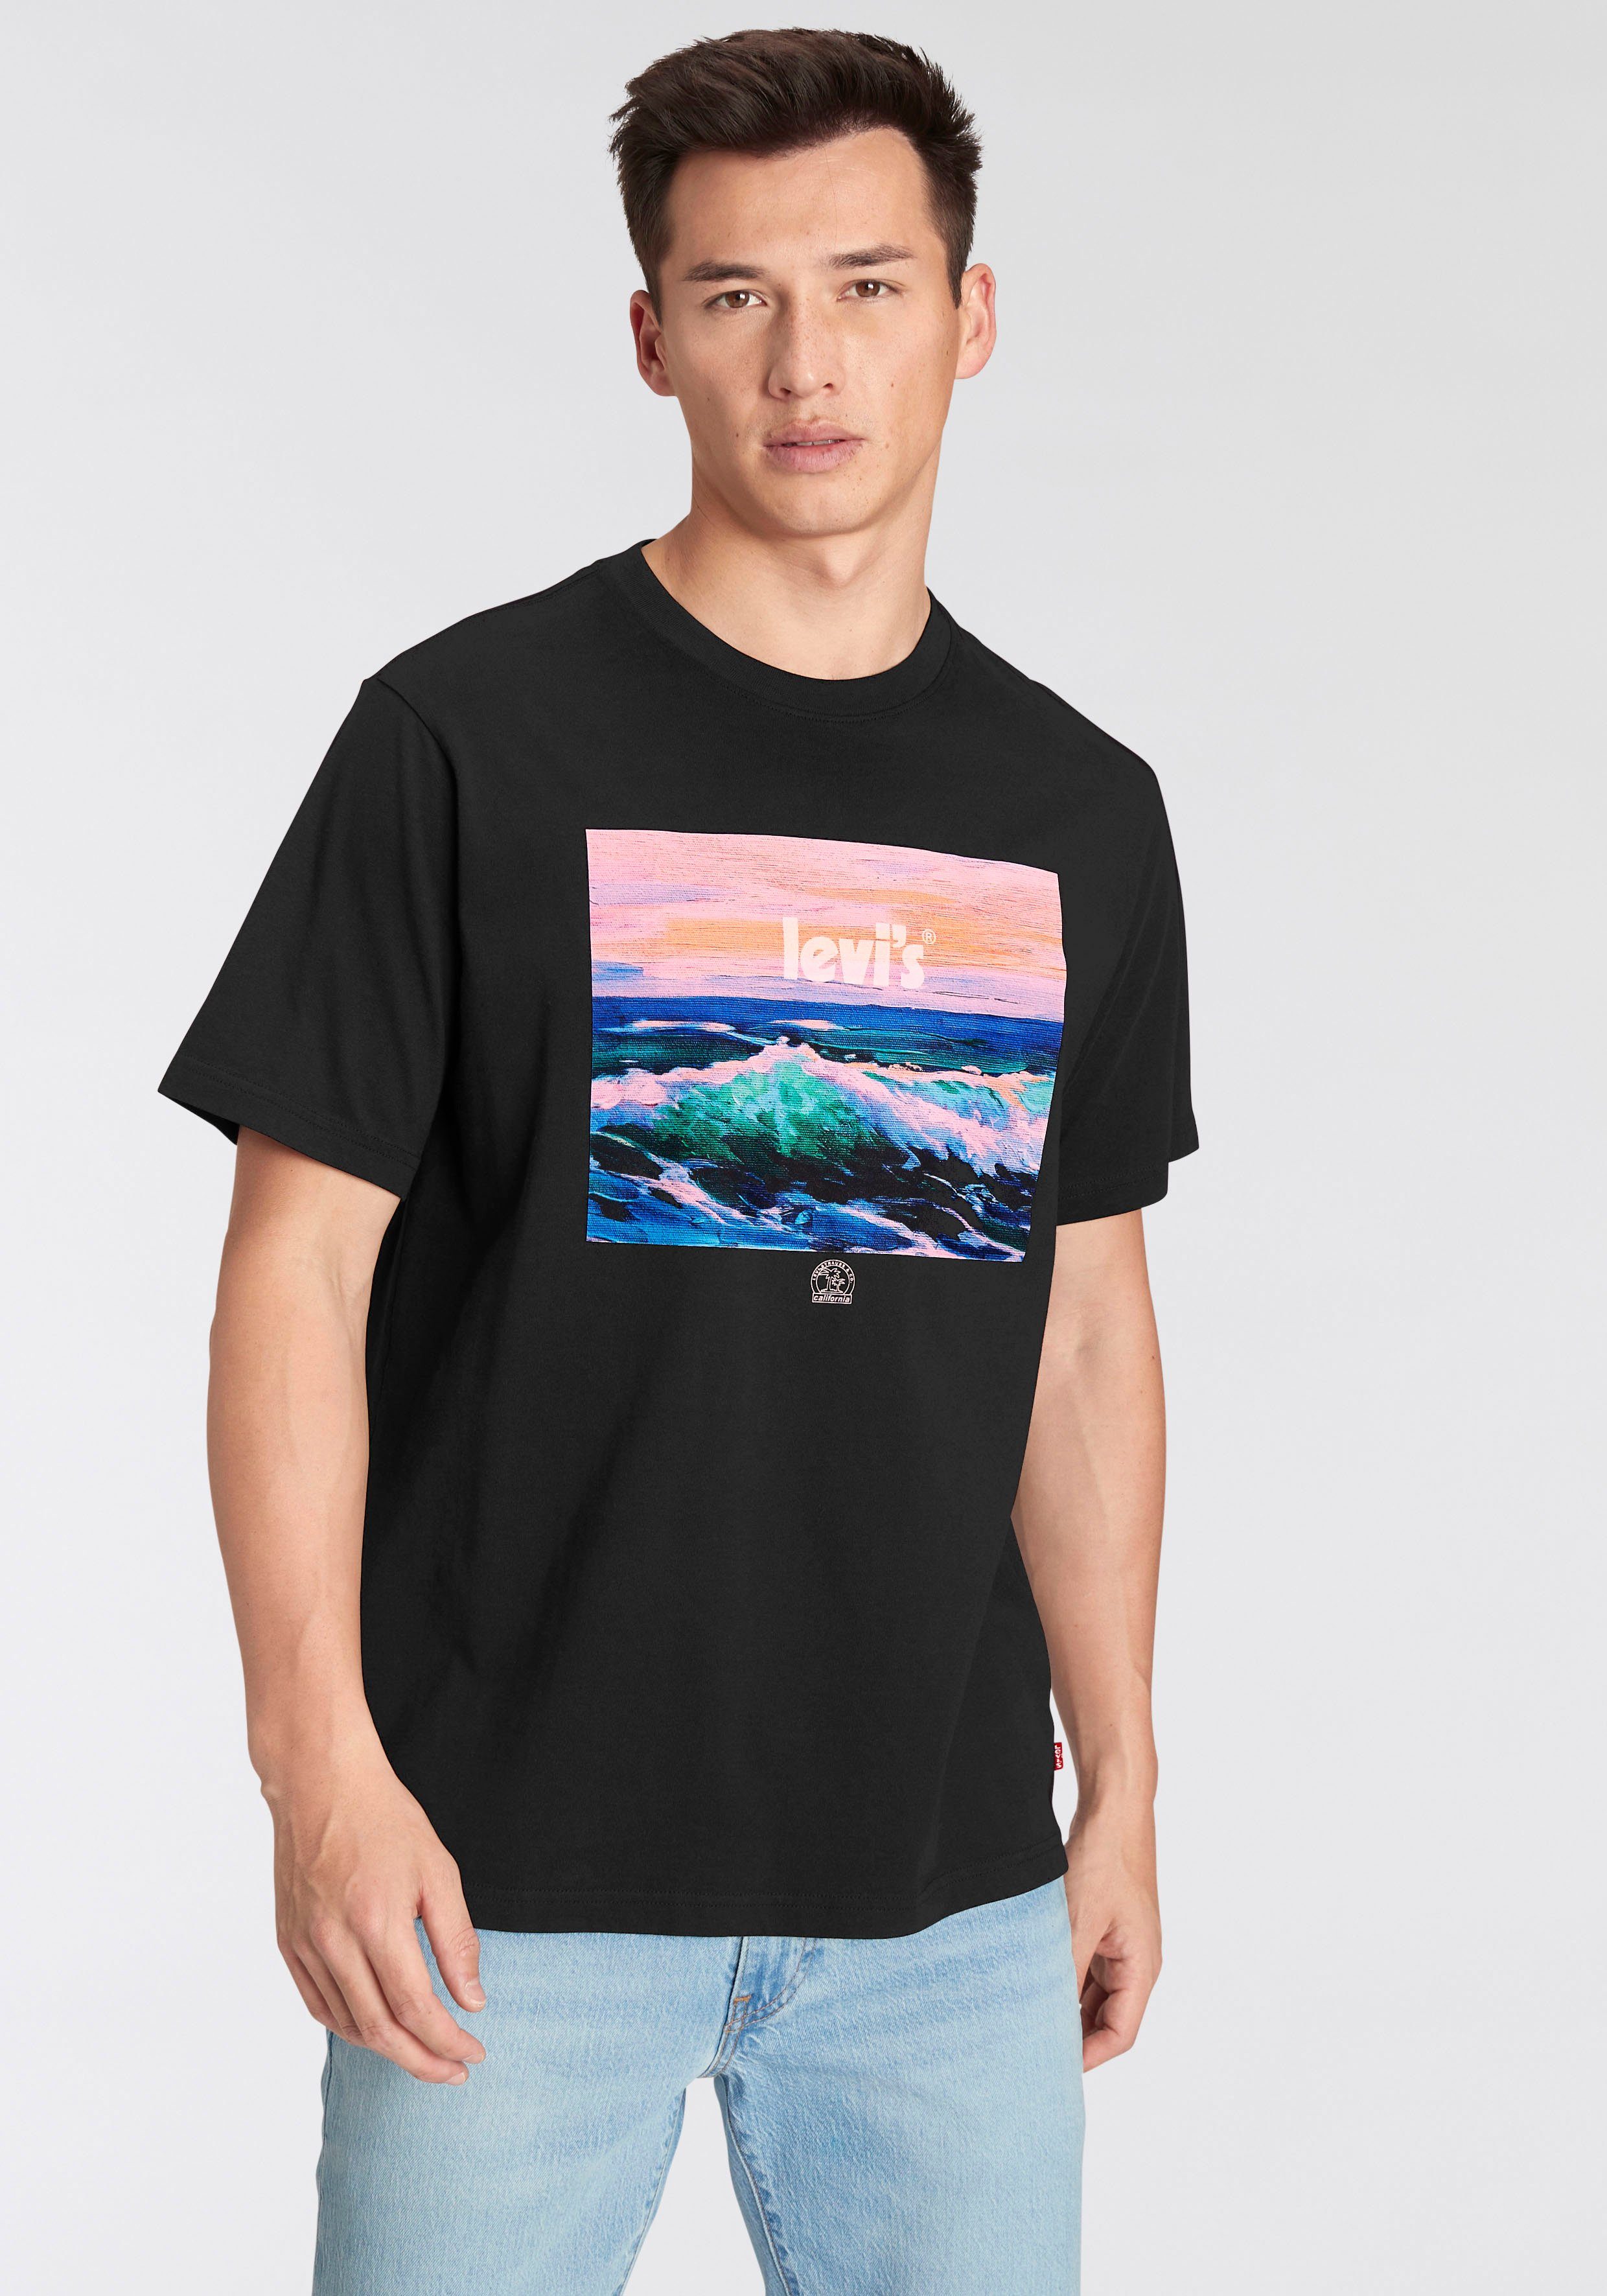 Levi's® T-Shirt SS RELAXED FIT TEE mit großem Frontprint POSTER WAVES CAVIAR